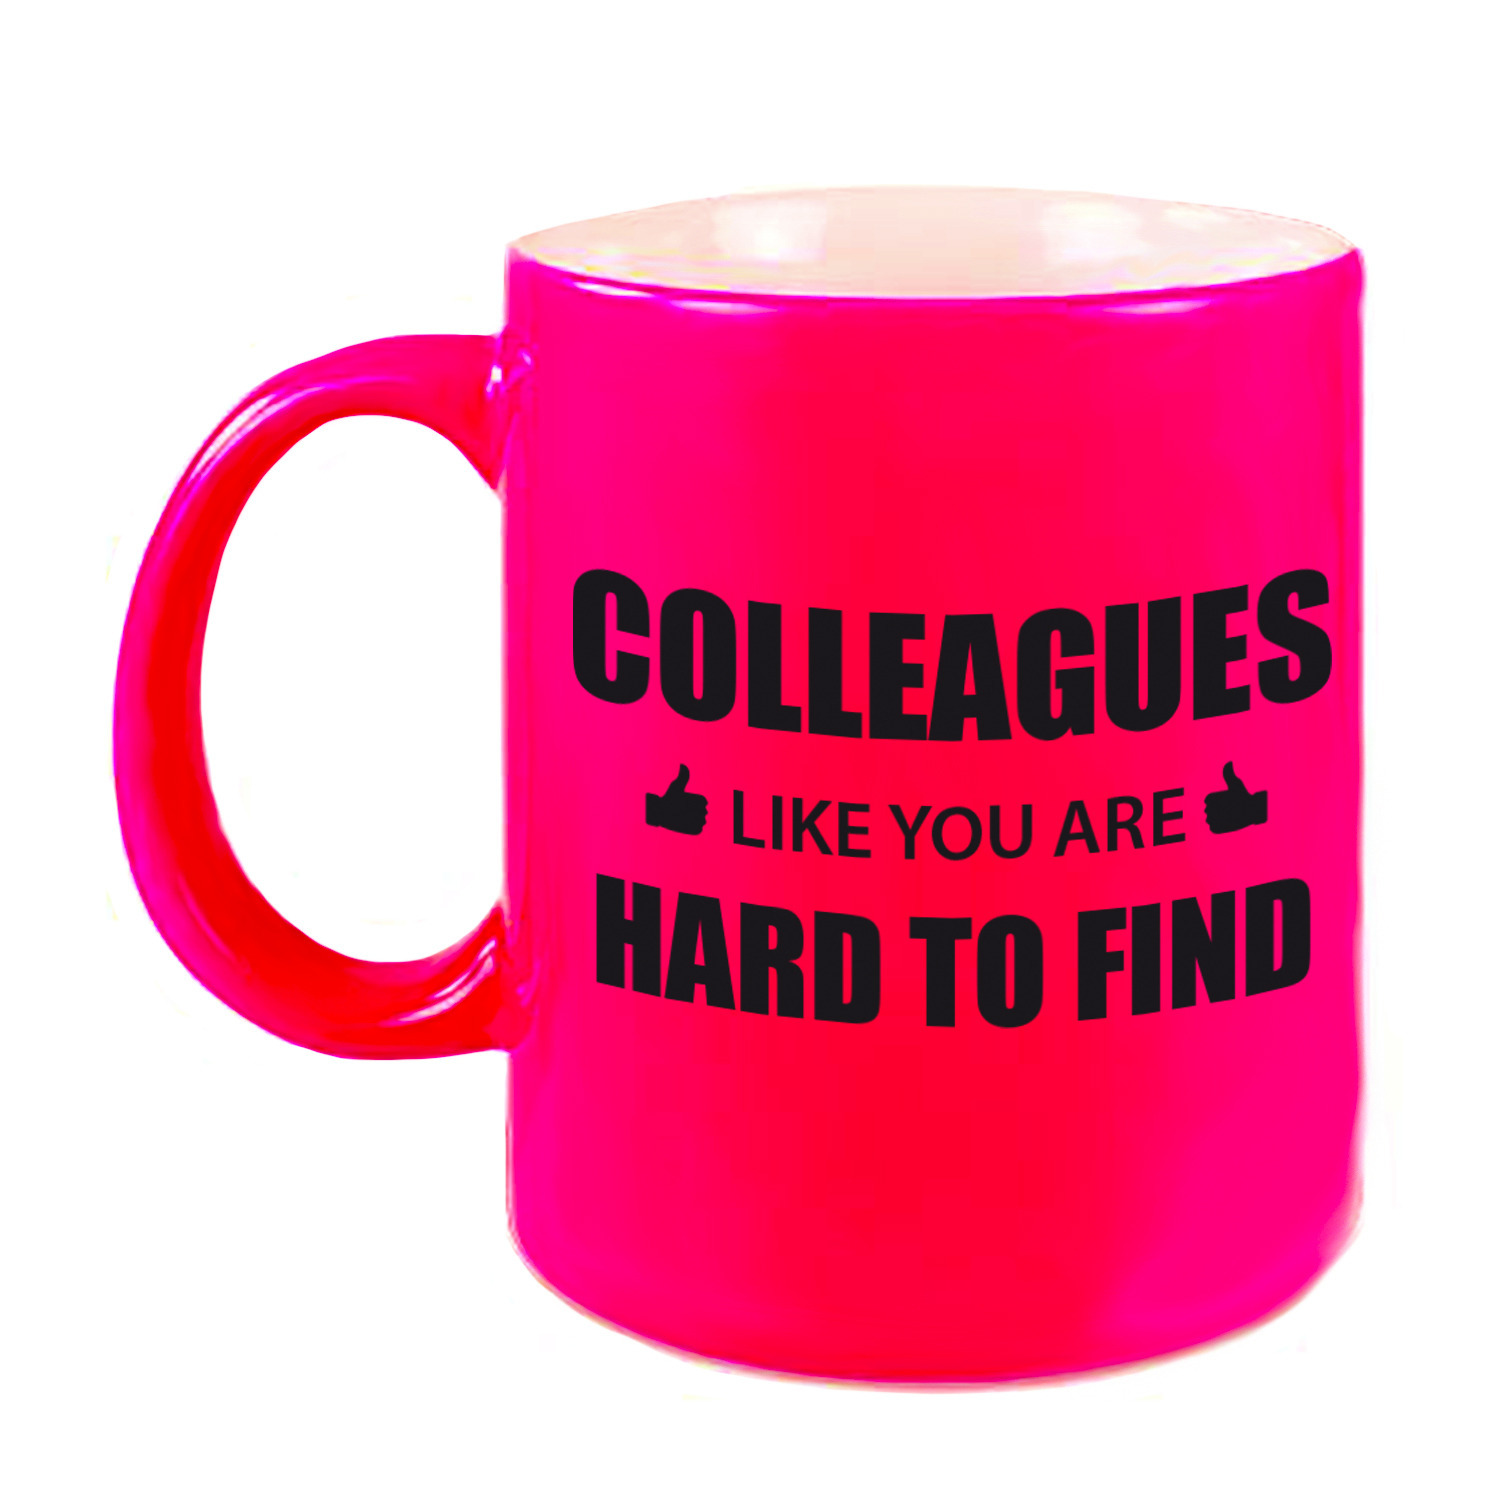 Collega cadeau mok-beker neon roze colleagues like you are hard to find